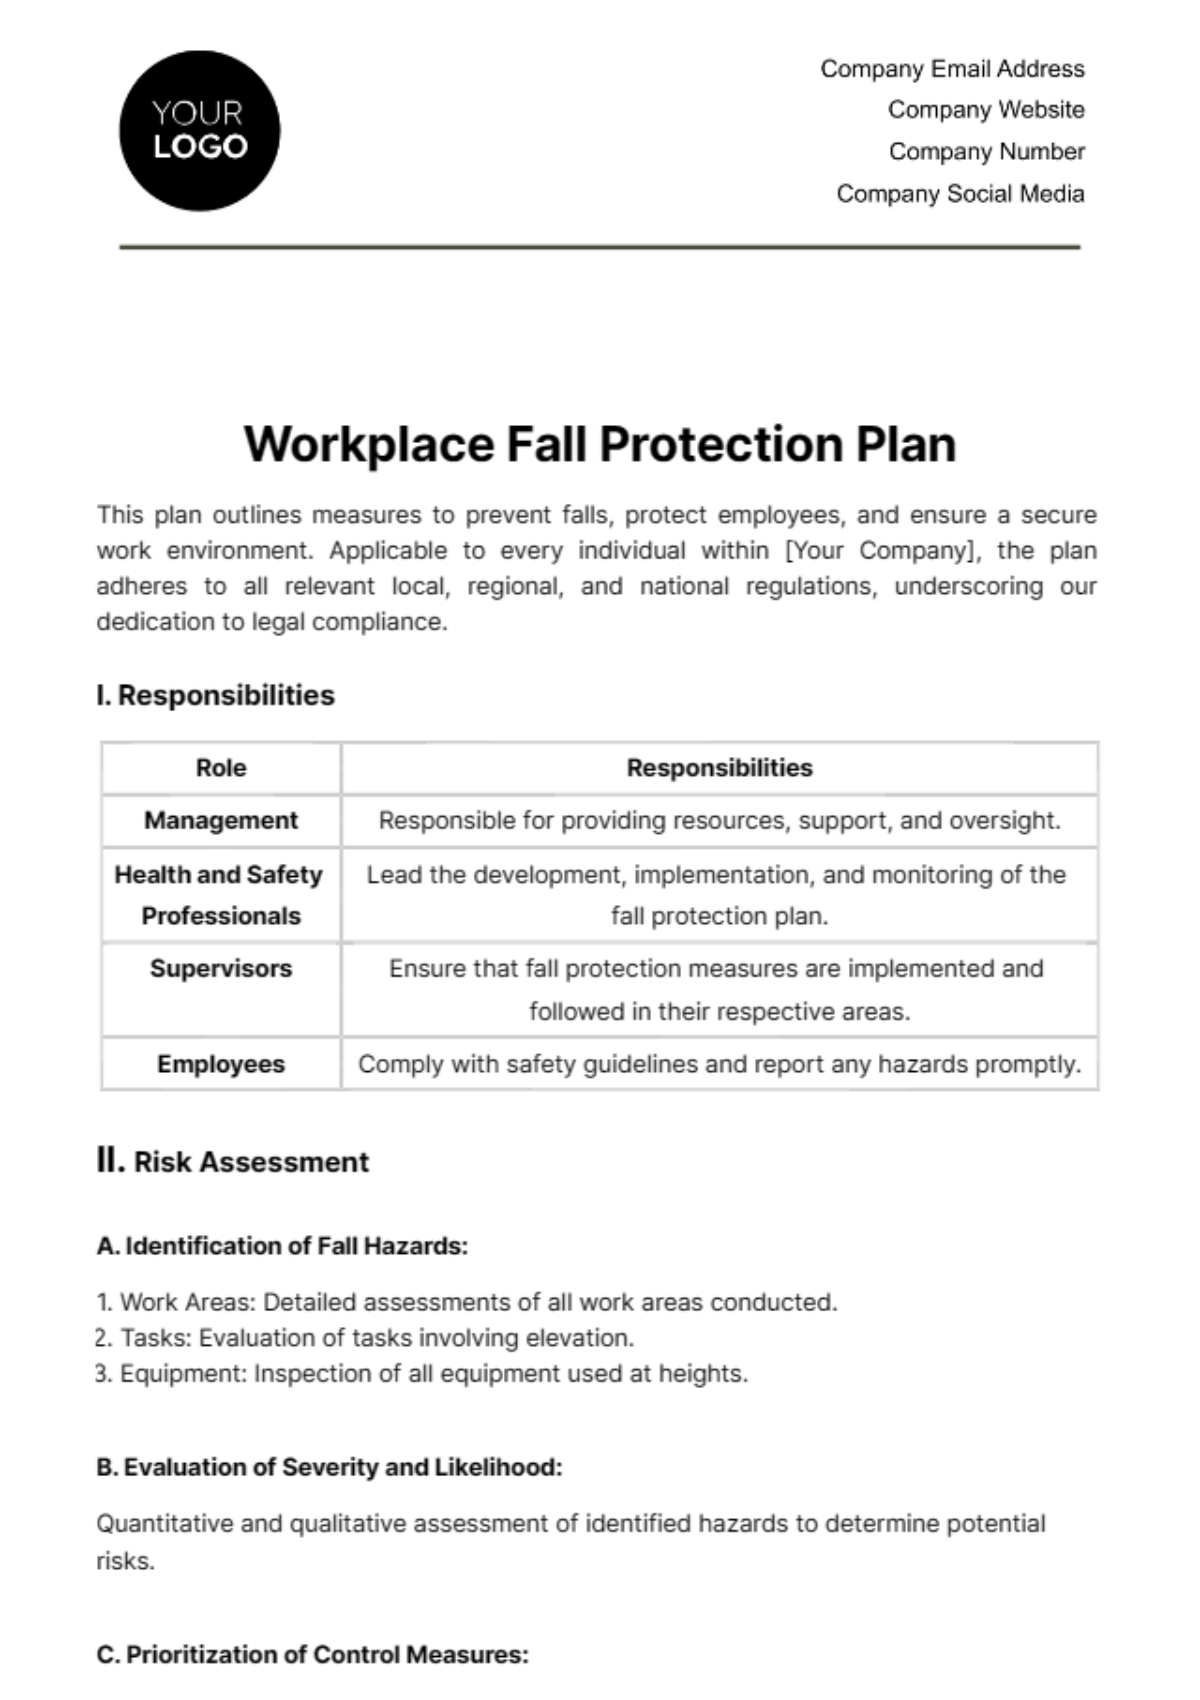 Free Workplace Fall Protection Plan Template